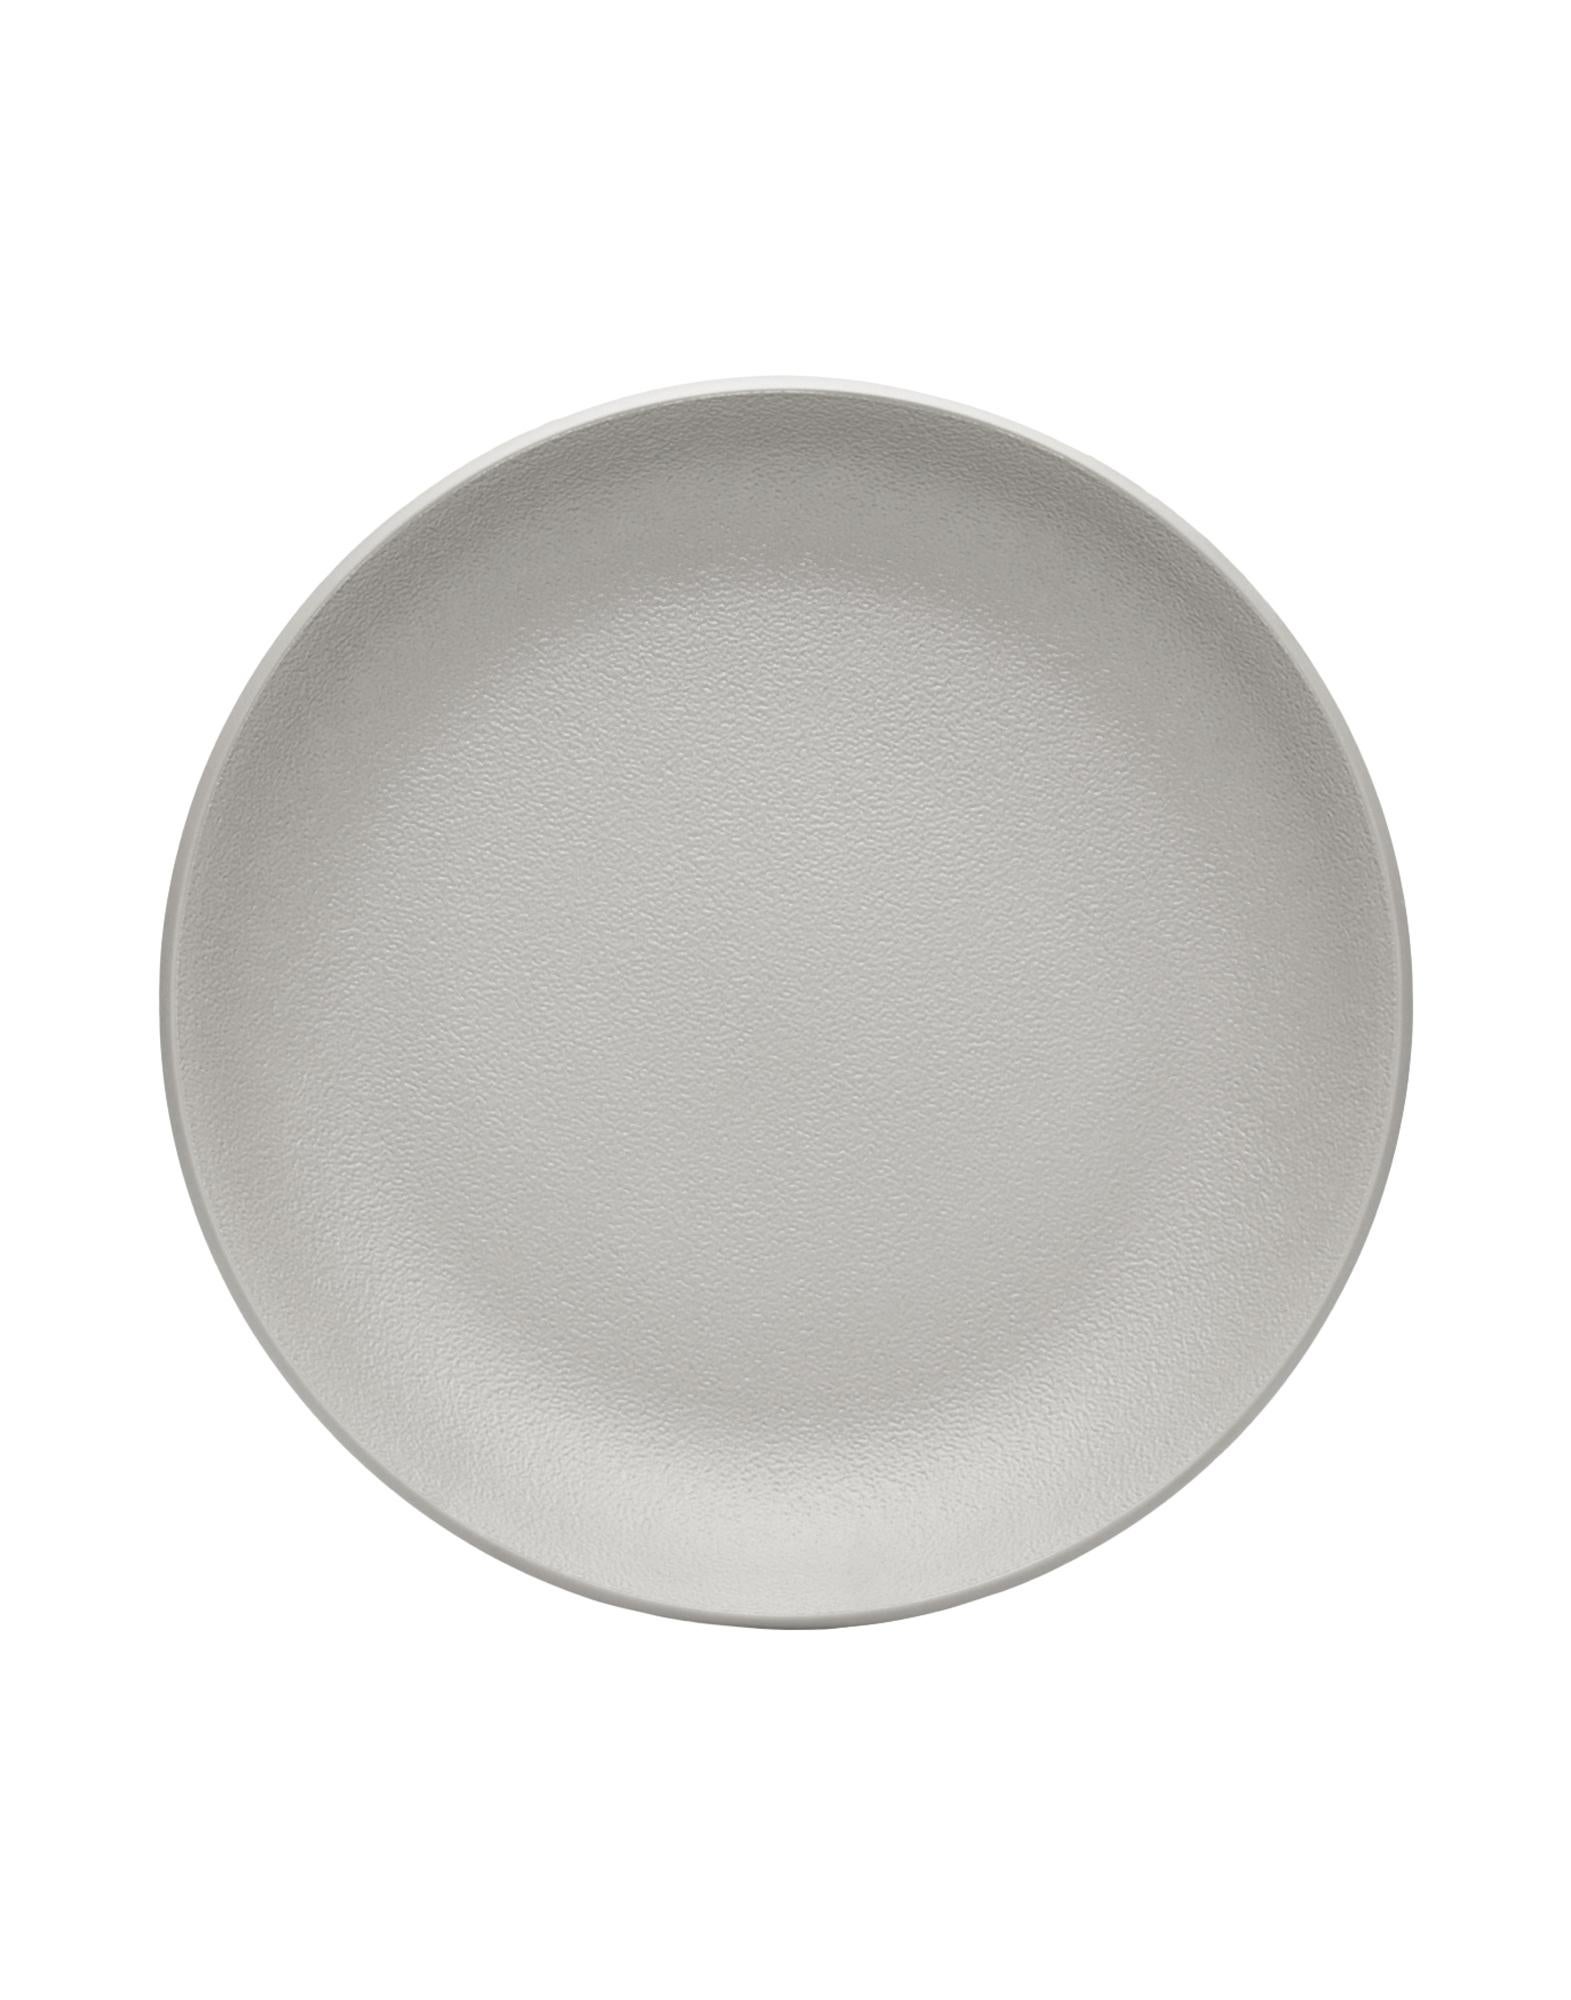 Contemporary Set of 4 Kartell Trama Plate in Light Grey by Patricia Urquiola For Sale